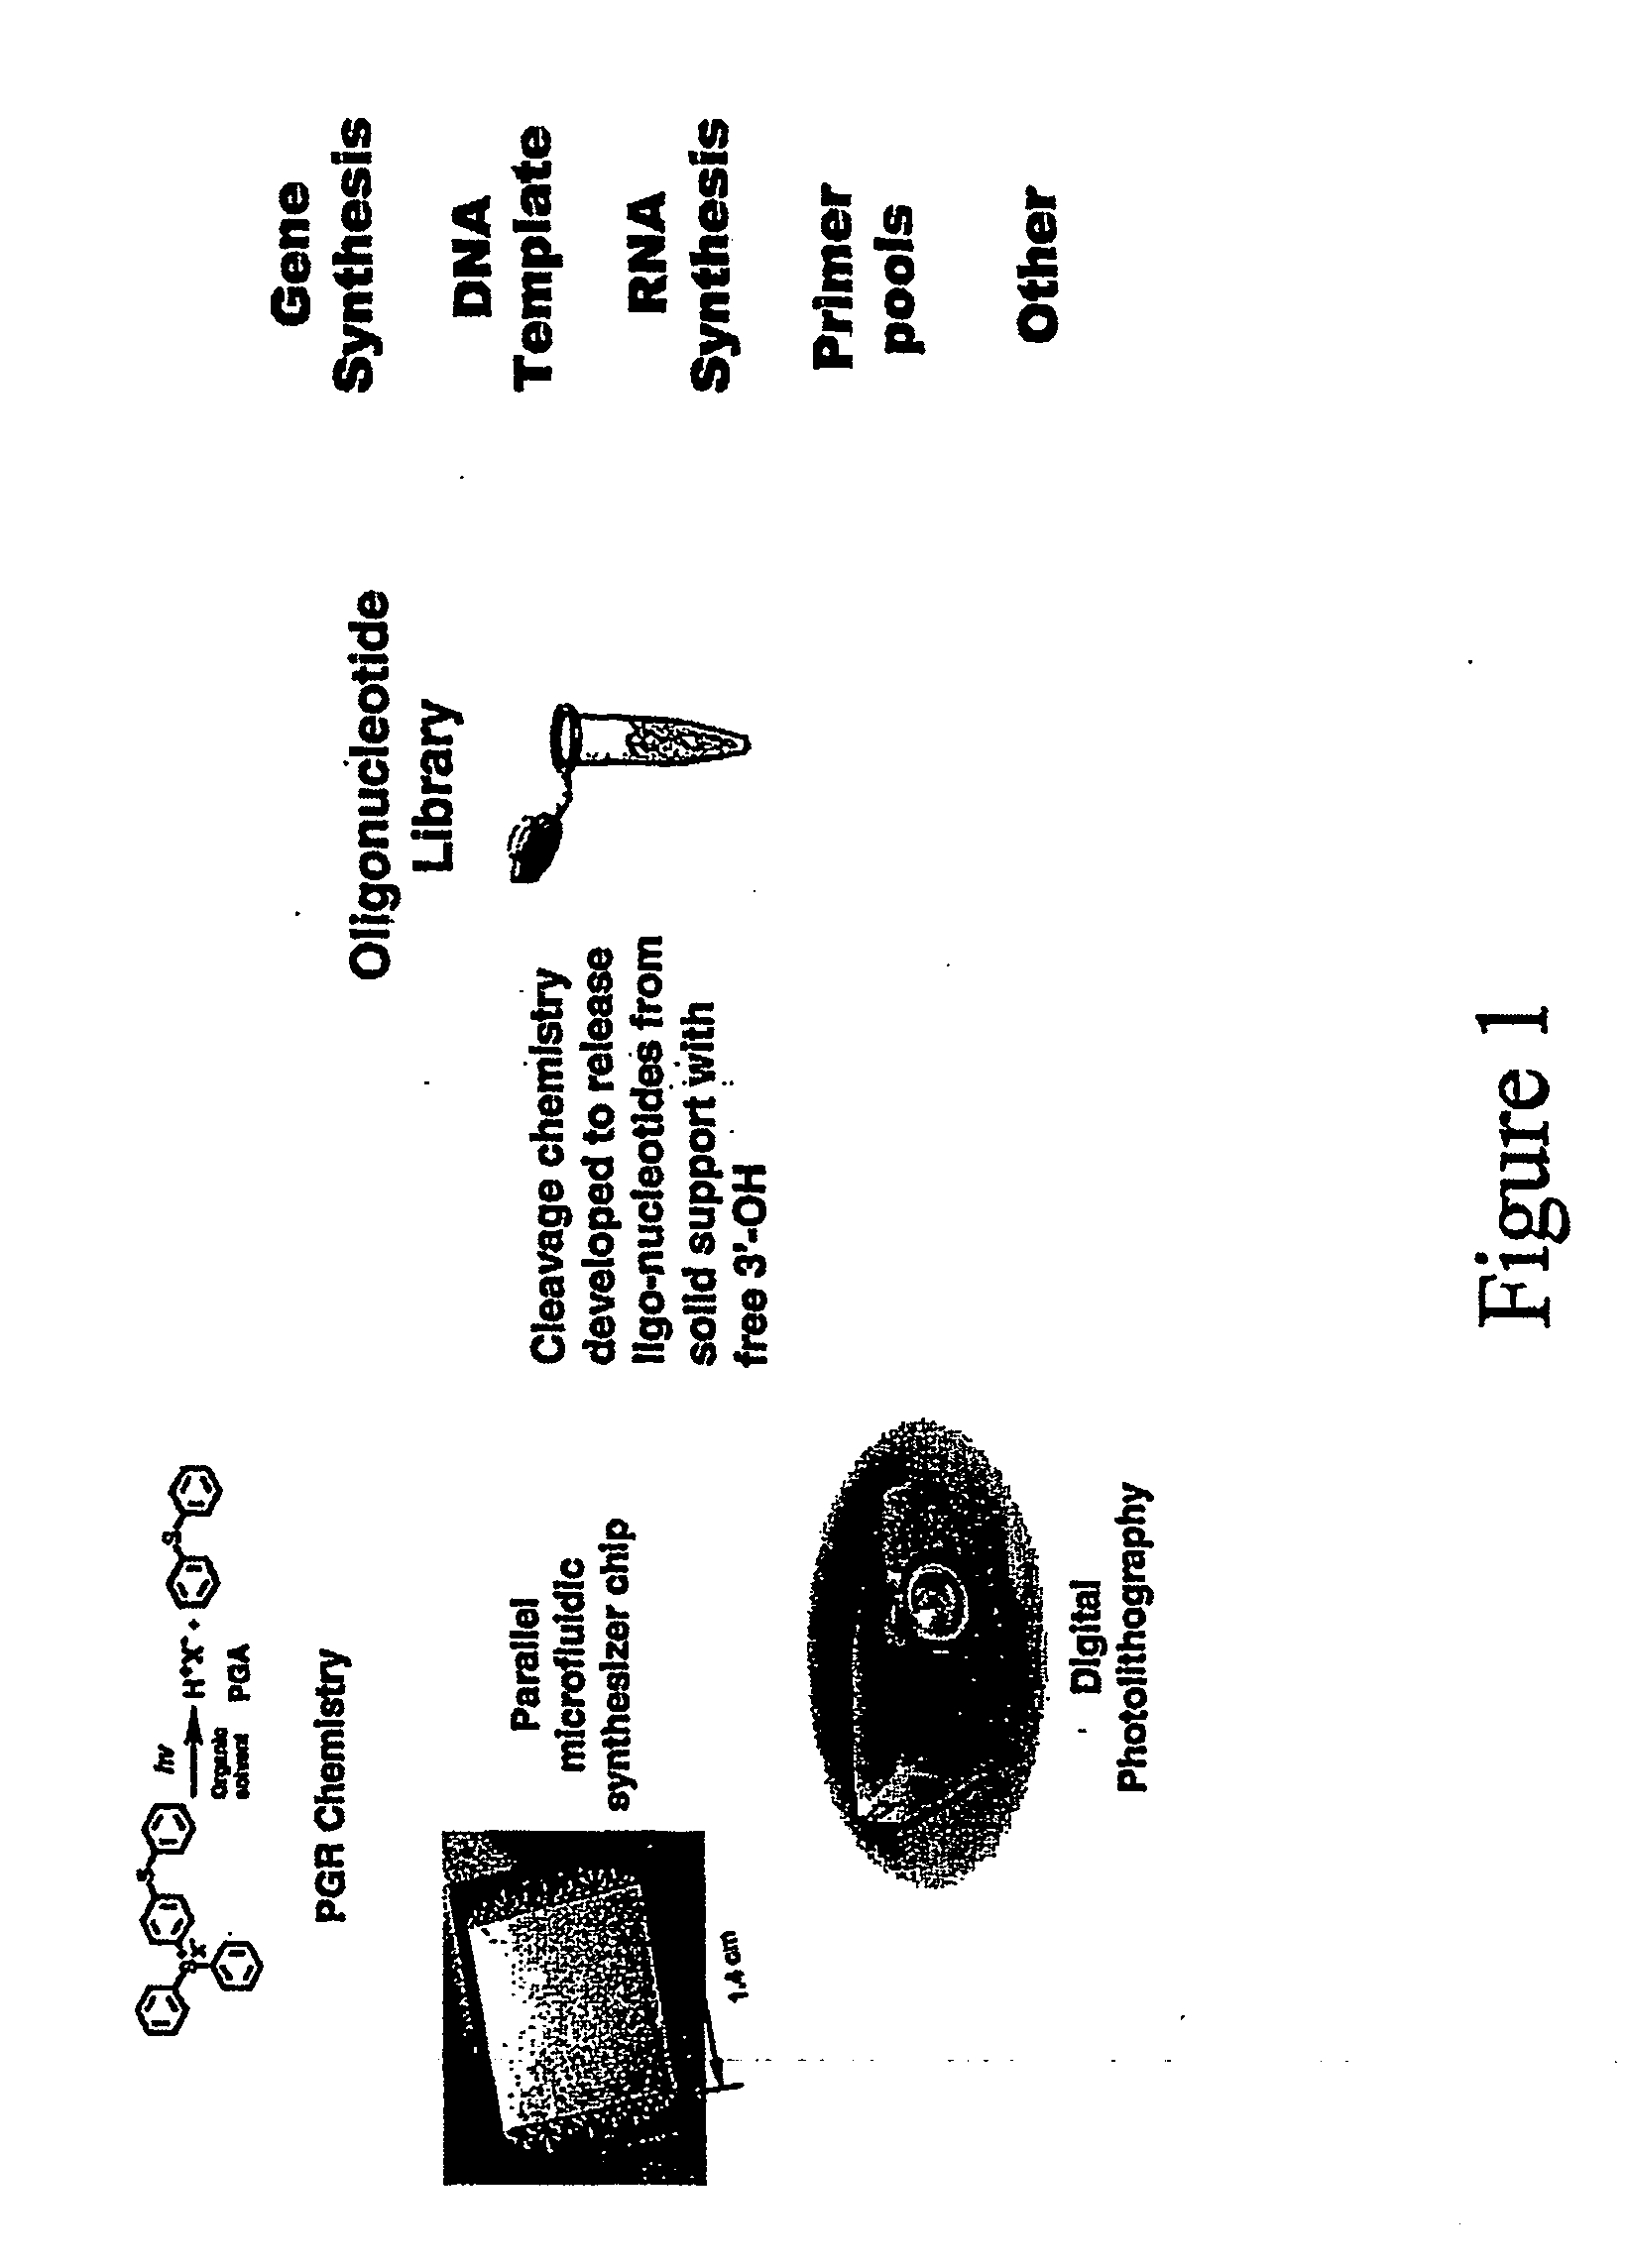 Array oligomer synthesis and use